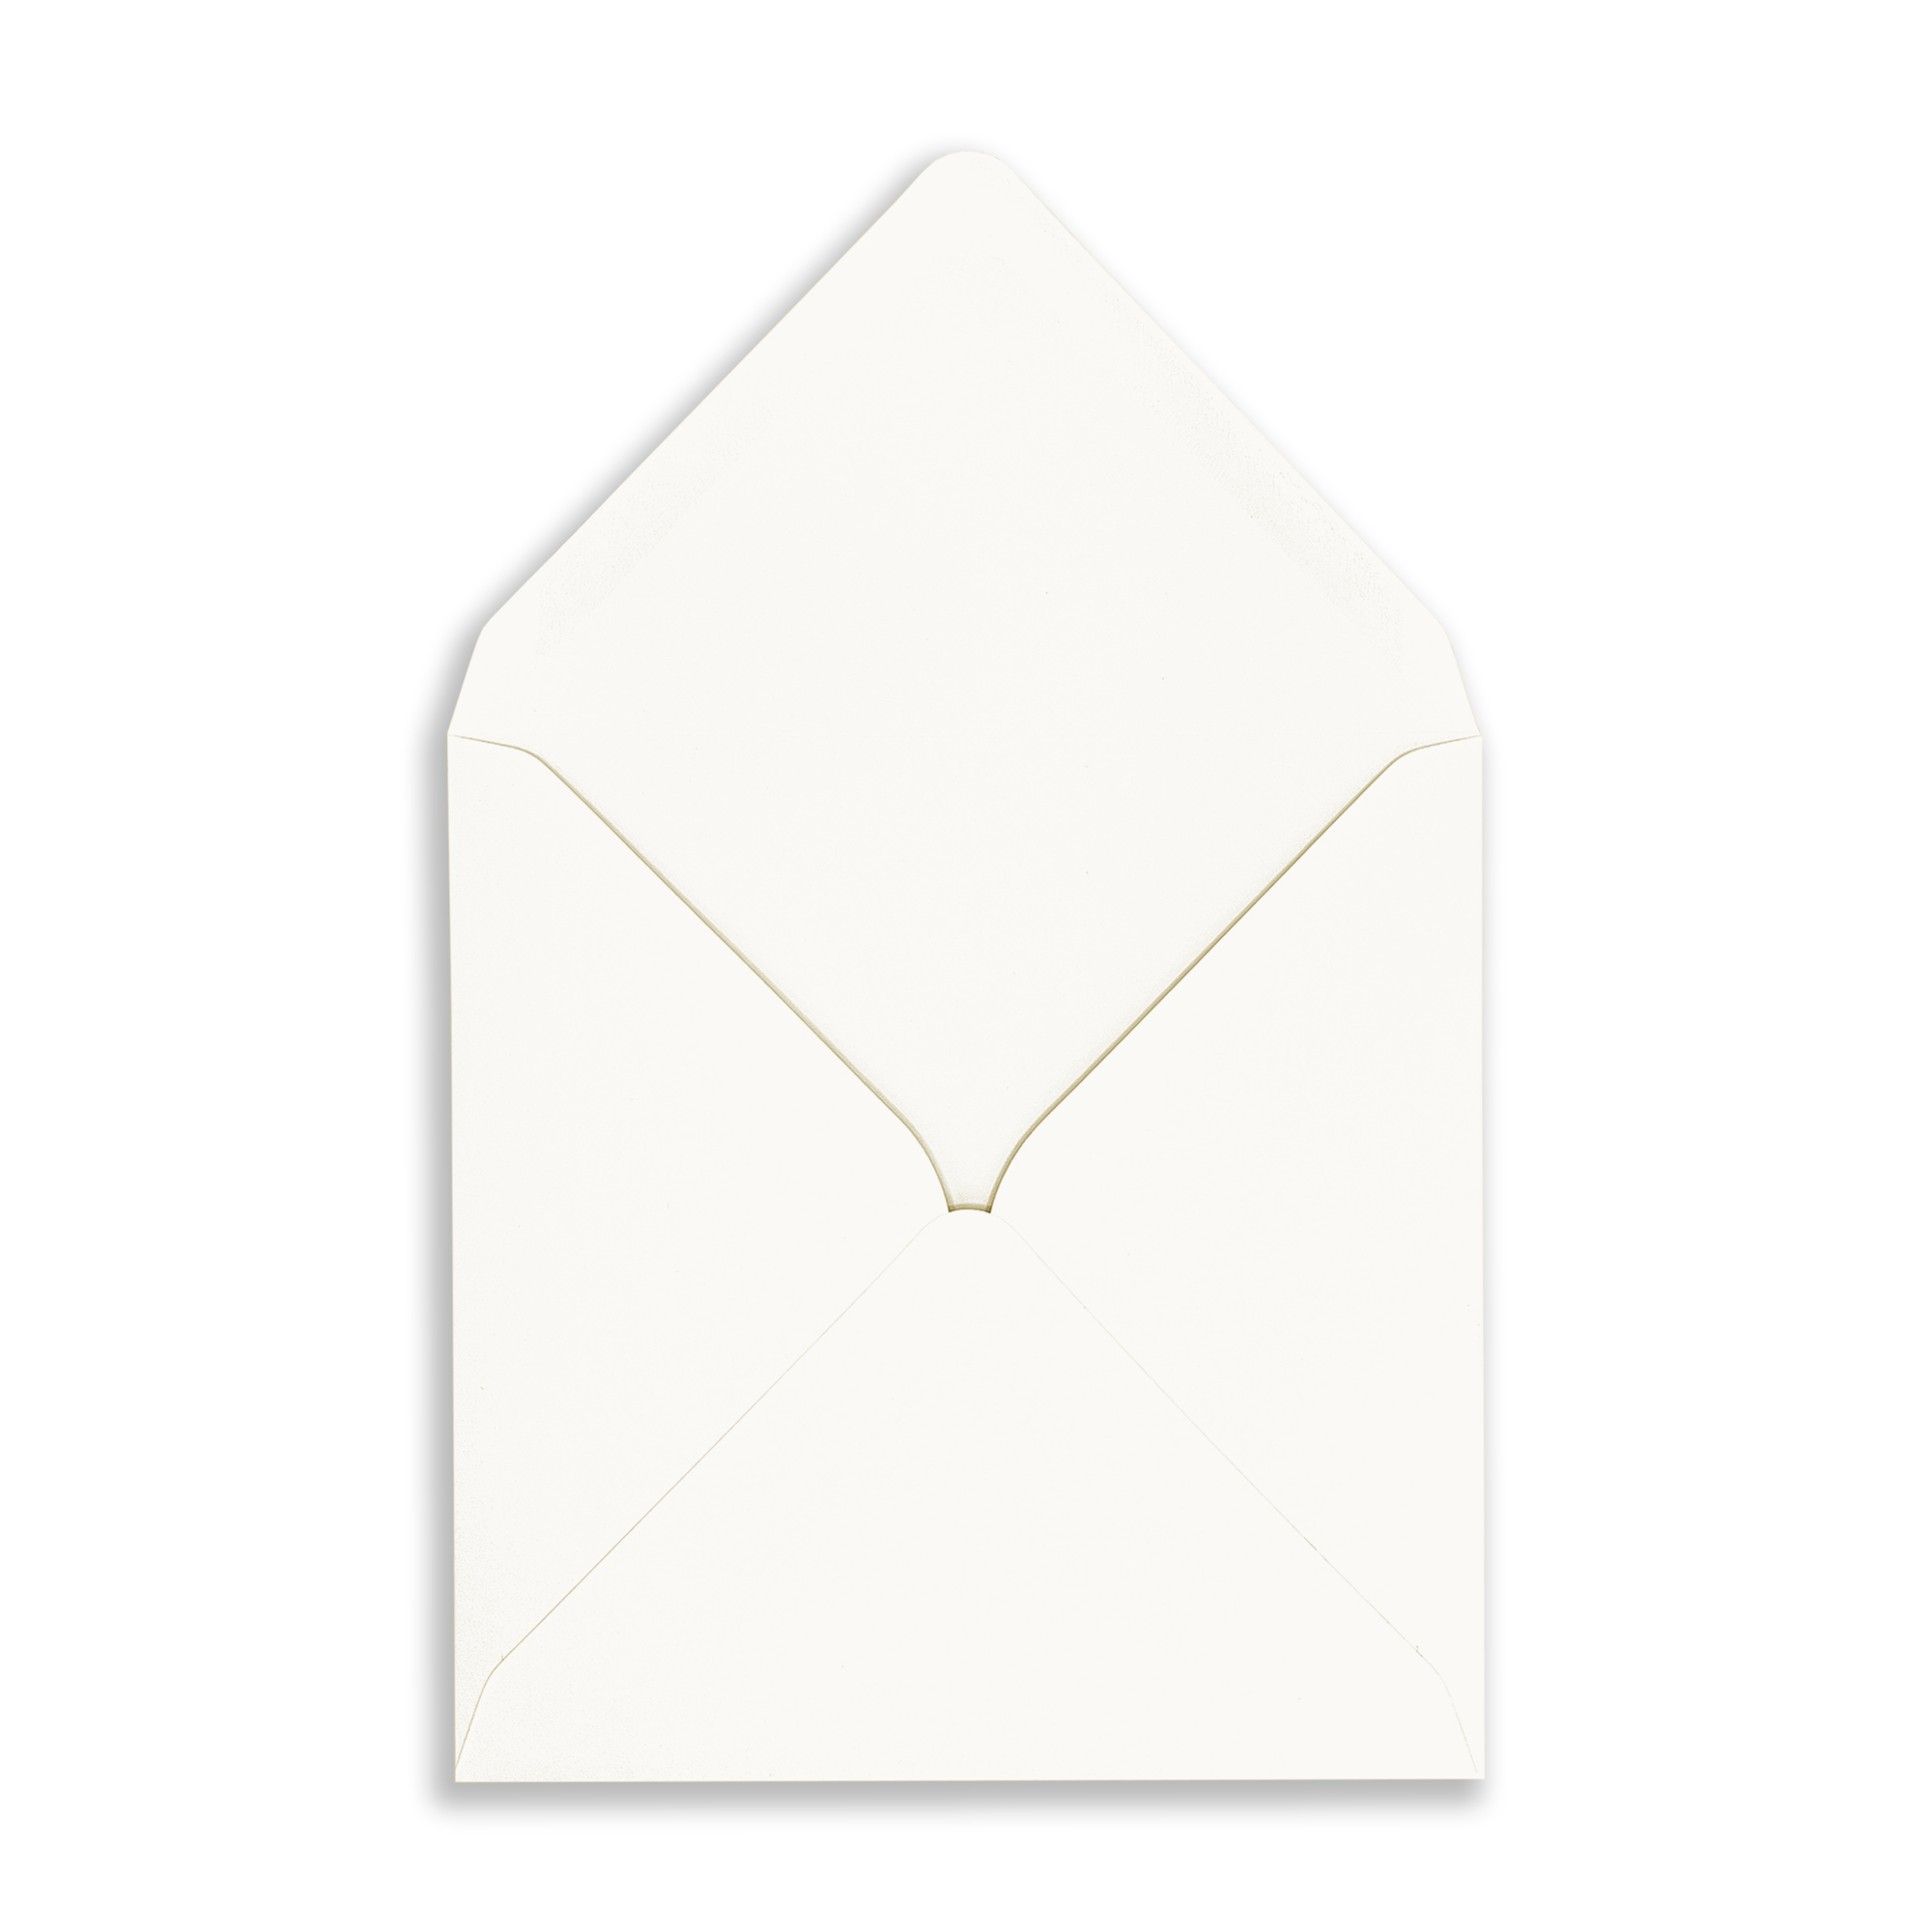 155mmSQbutterfly-smooth-Envelope_OpenFlap